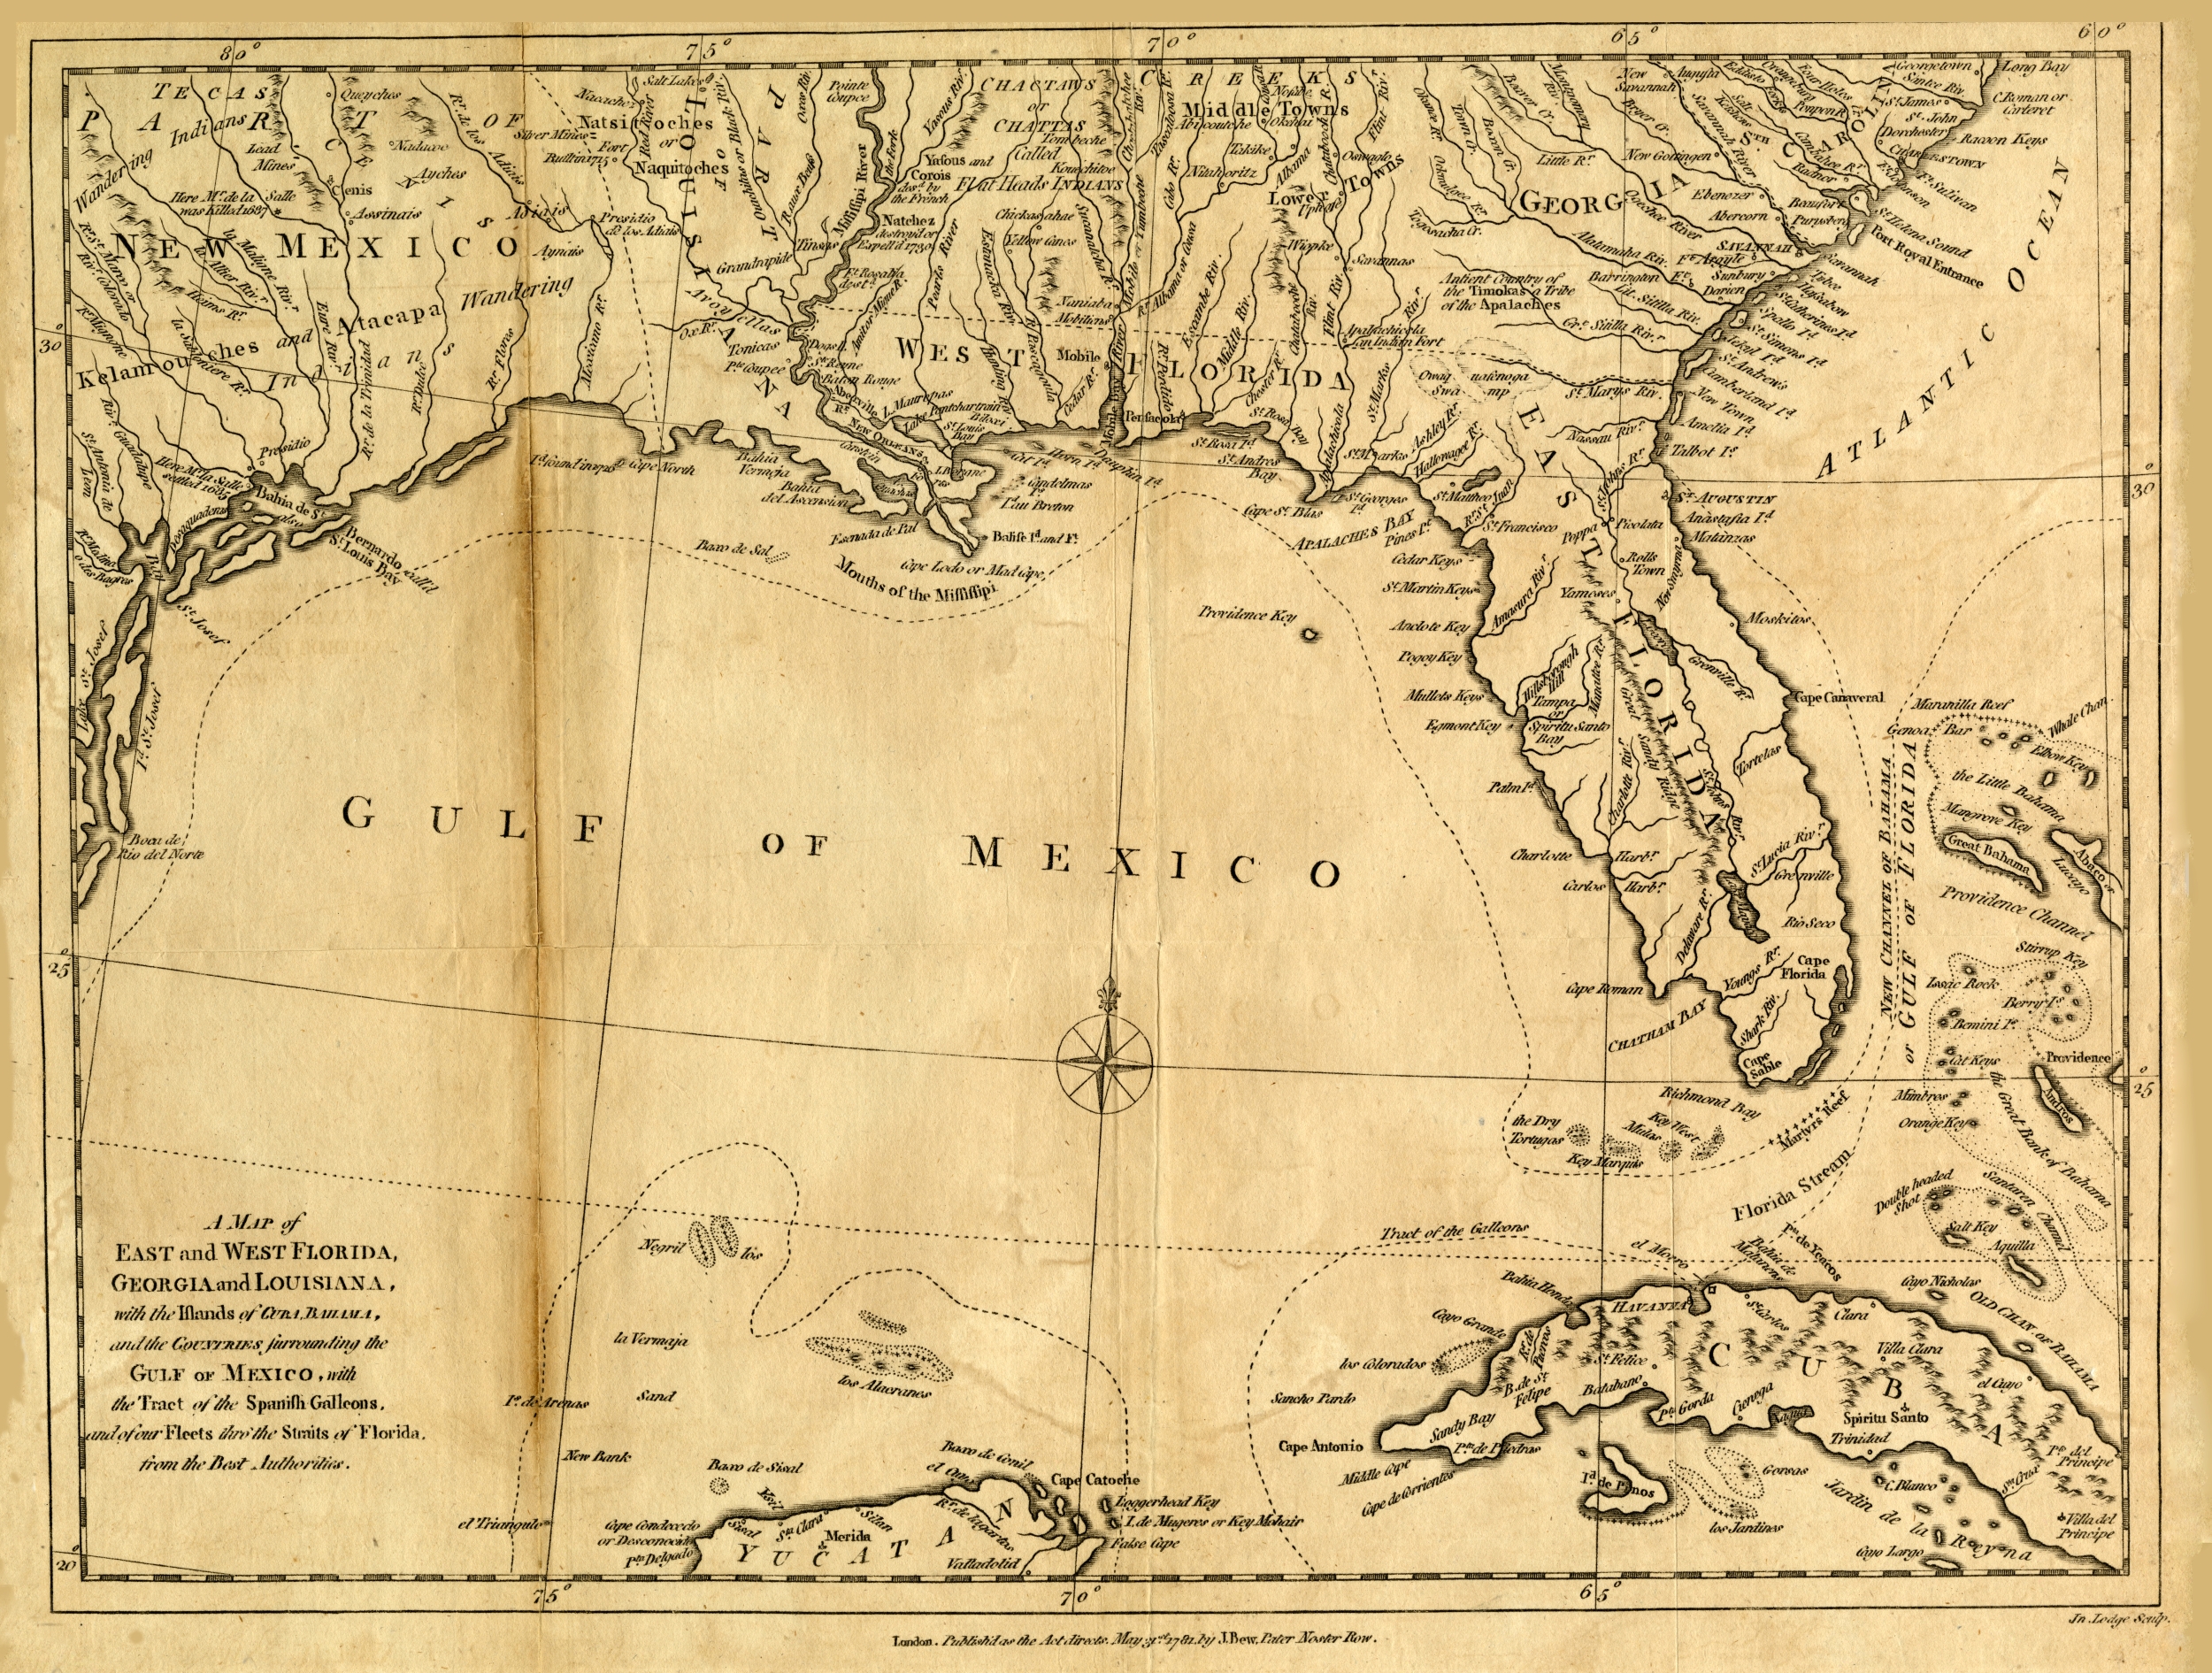 Southeastern US with East and West Florida, and Gulf of Mexico, 1781